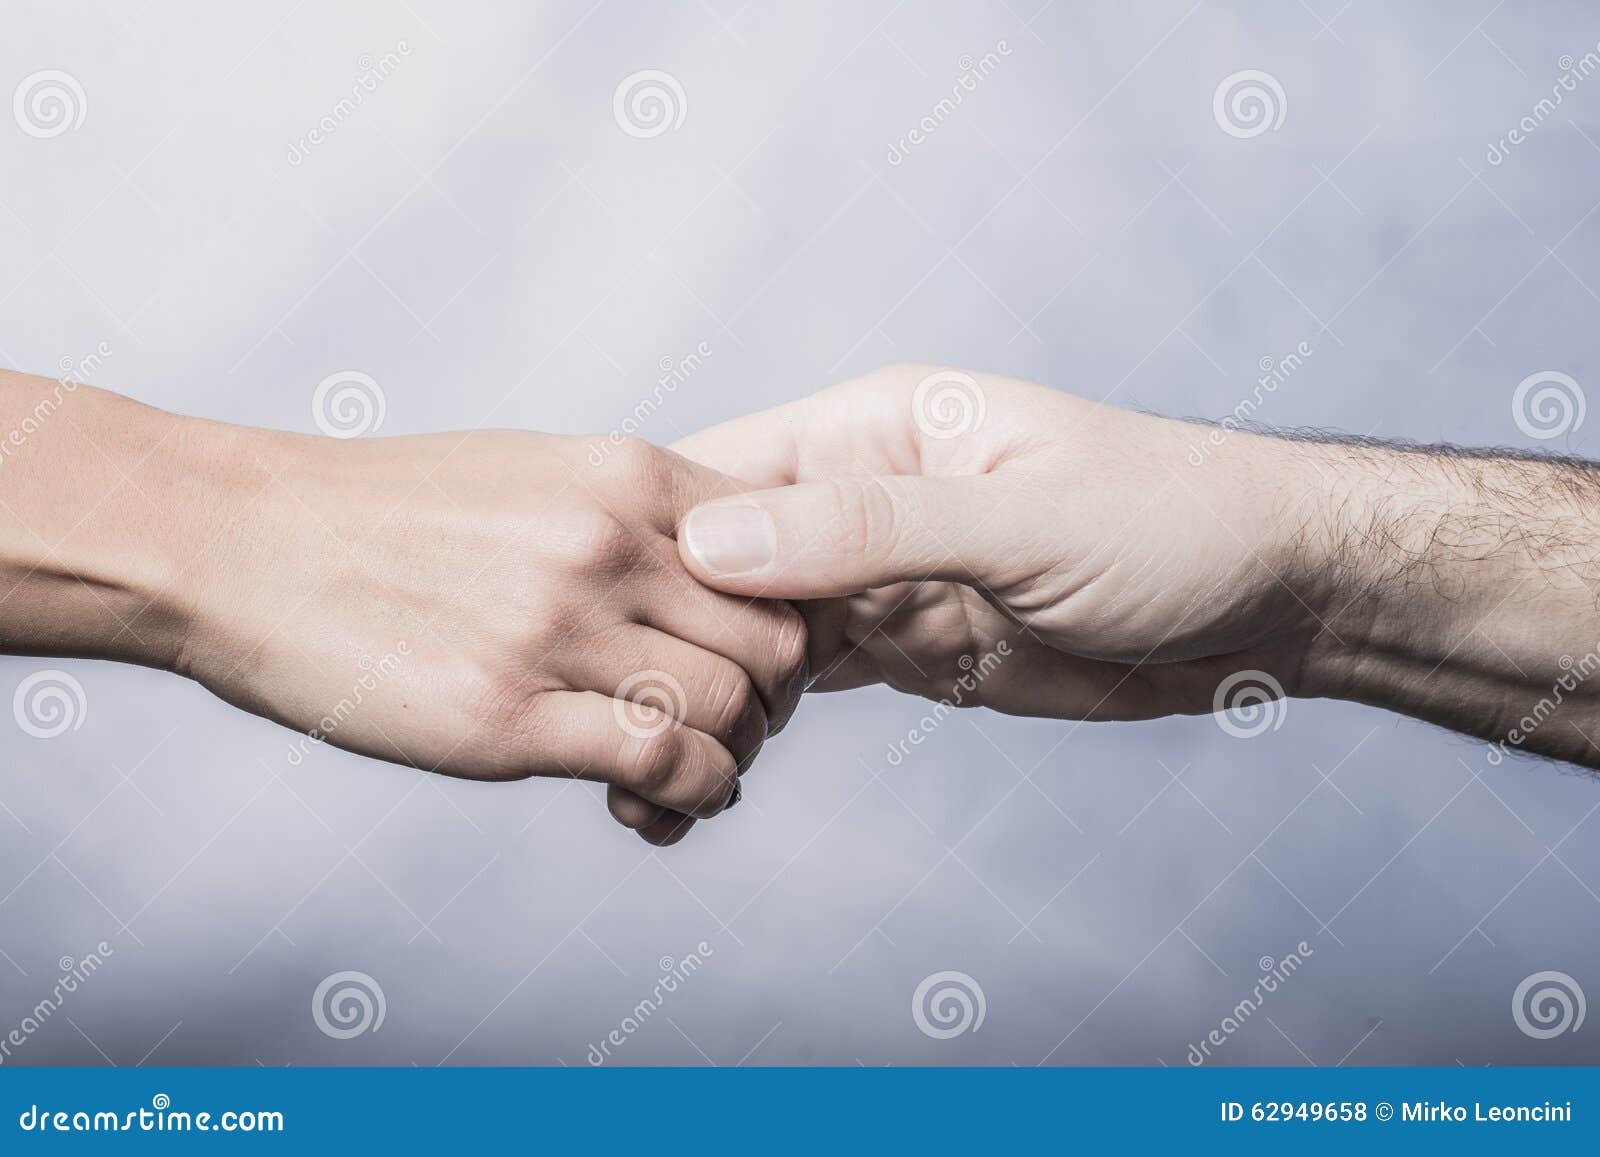 Male And Female Hands Stock Photo - Image: 62949658